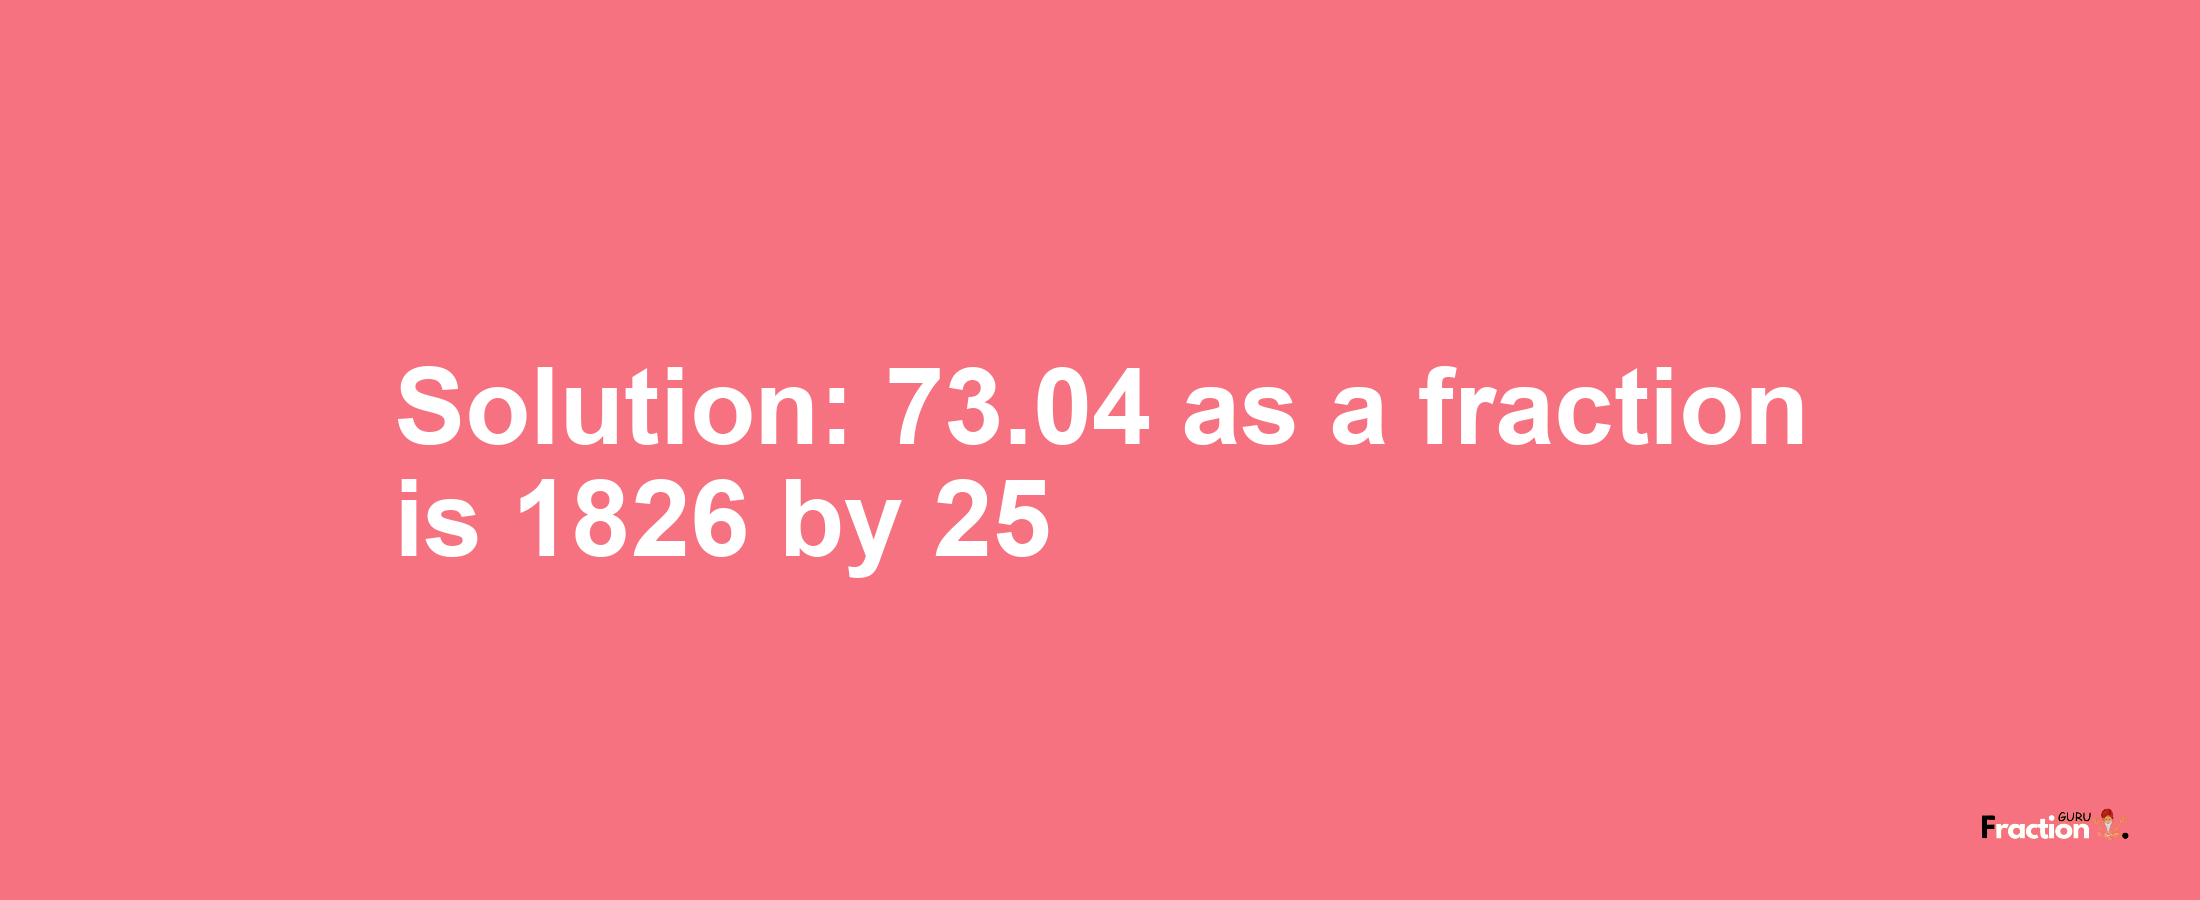 Solution:73.04 as a fraction is 1826/25